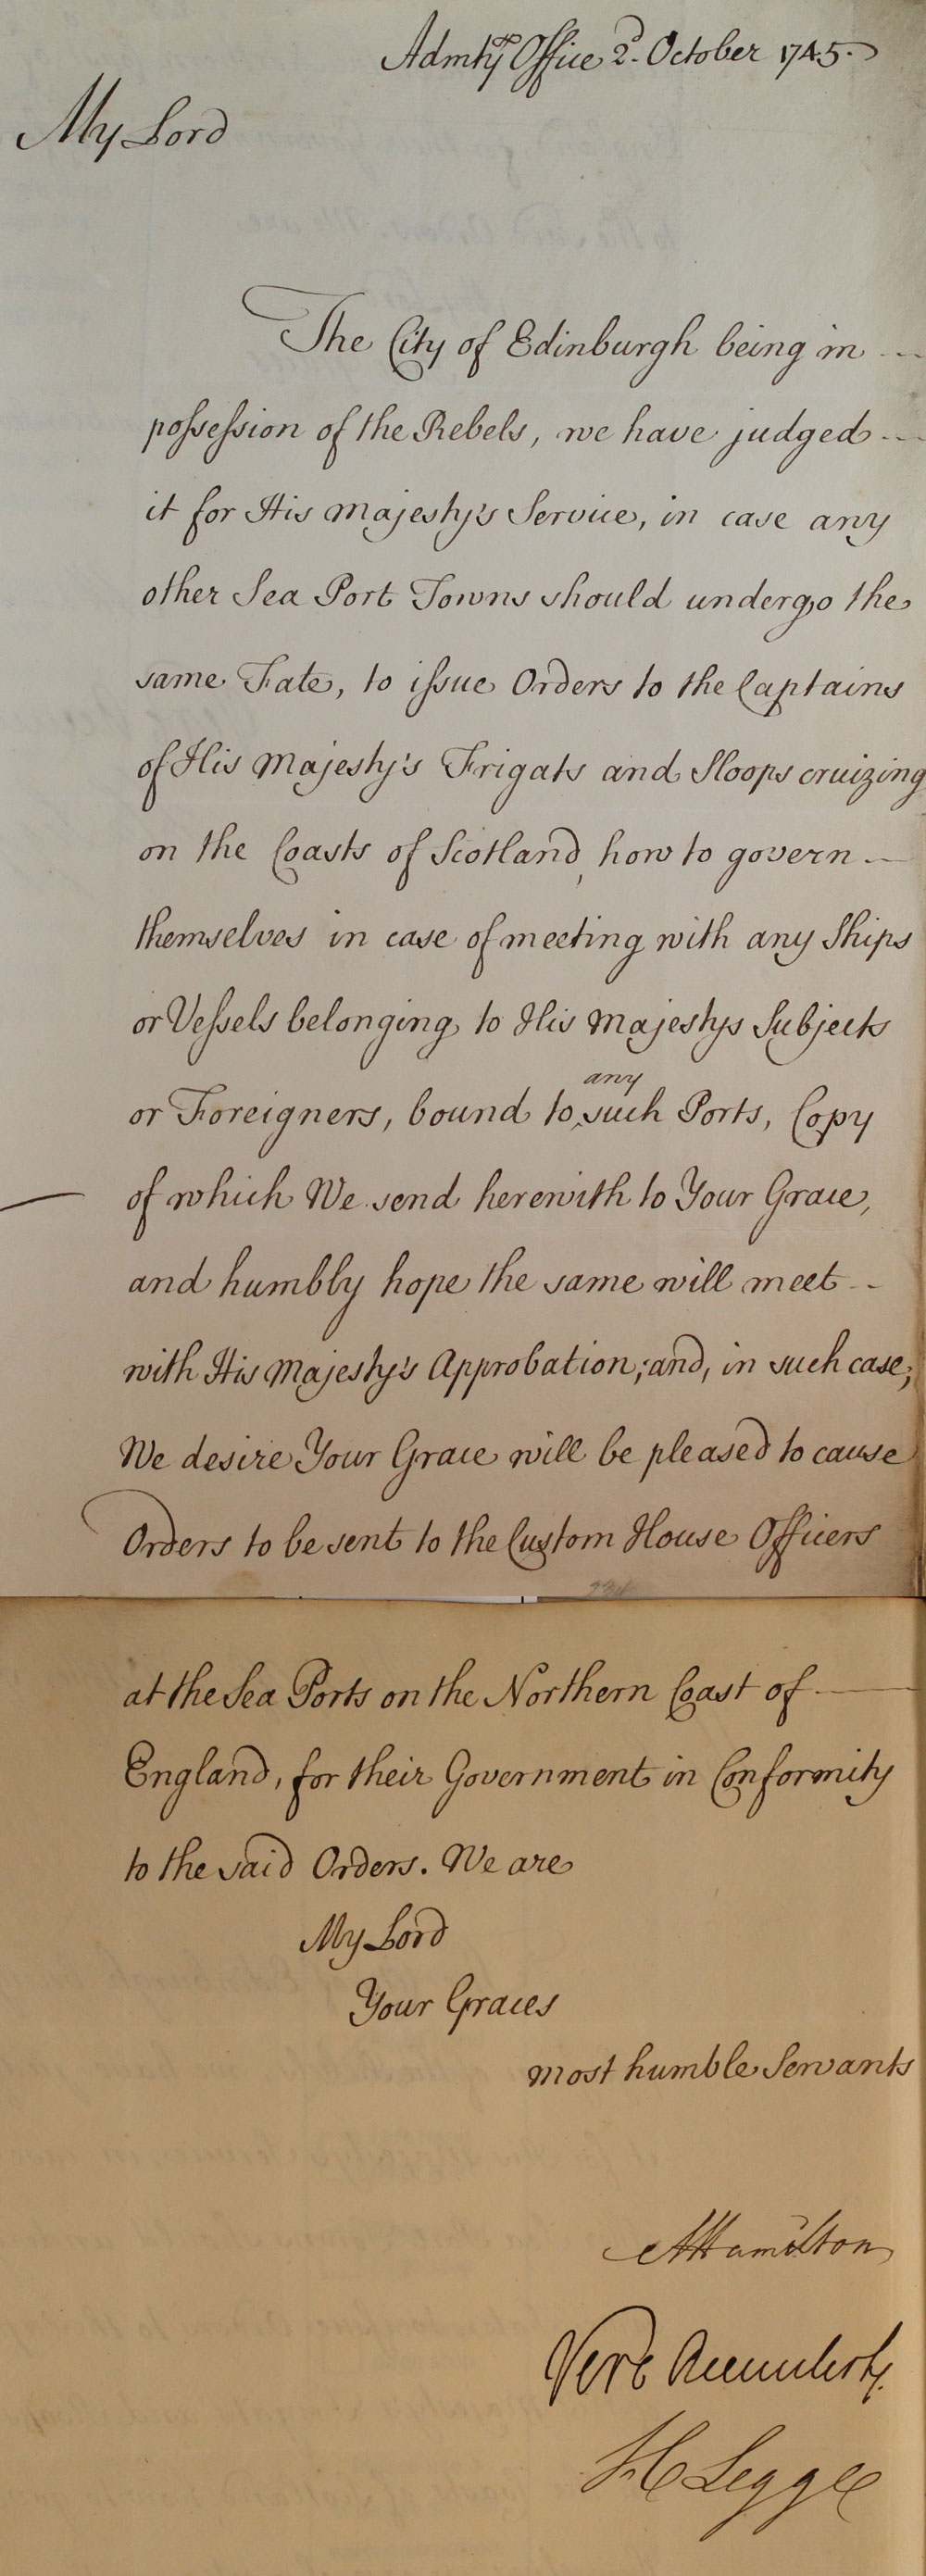 Letter from the London Admiralty Office, 1745 (SP 42/29/82)